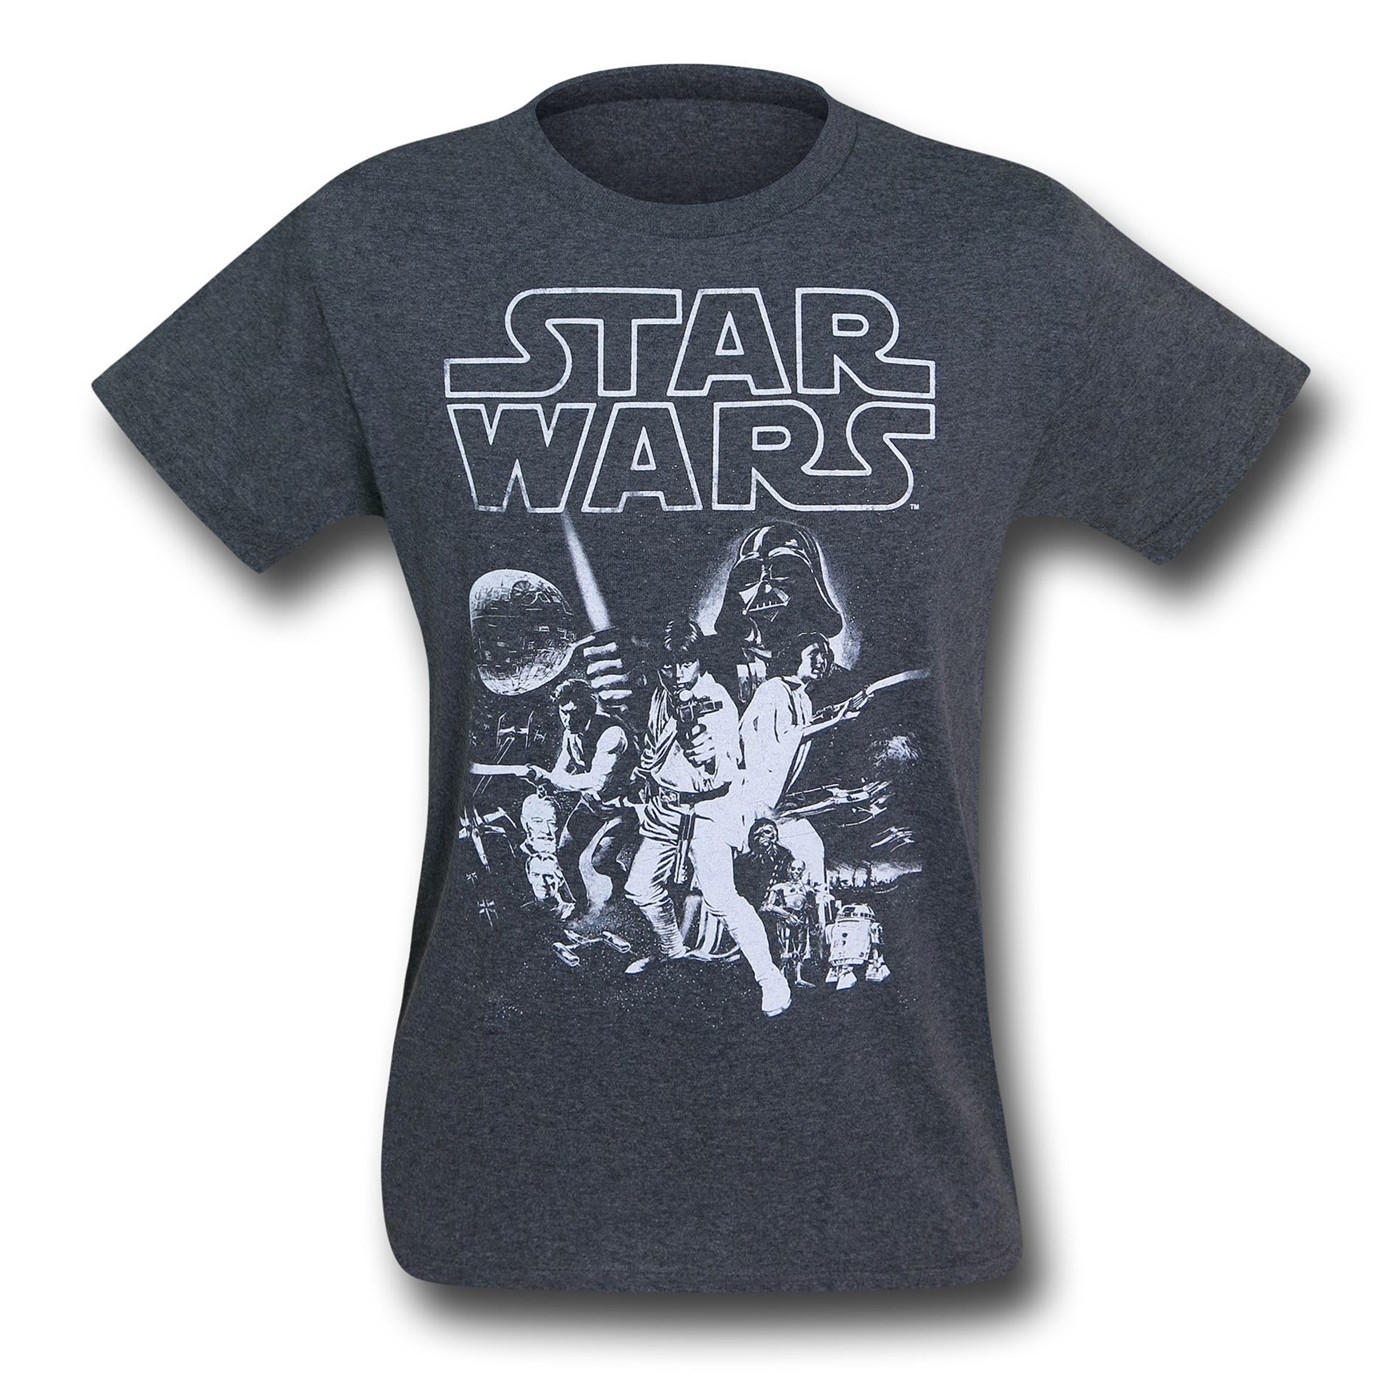 Star Wars Heather Charcoal Poster T-Shirt